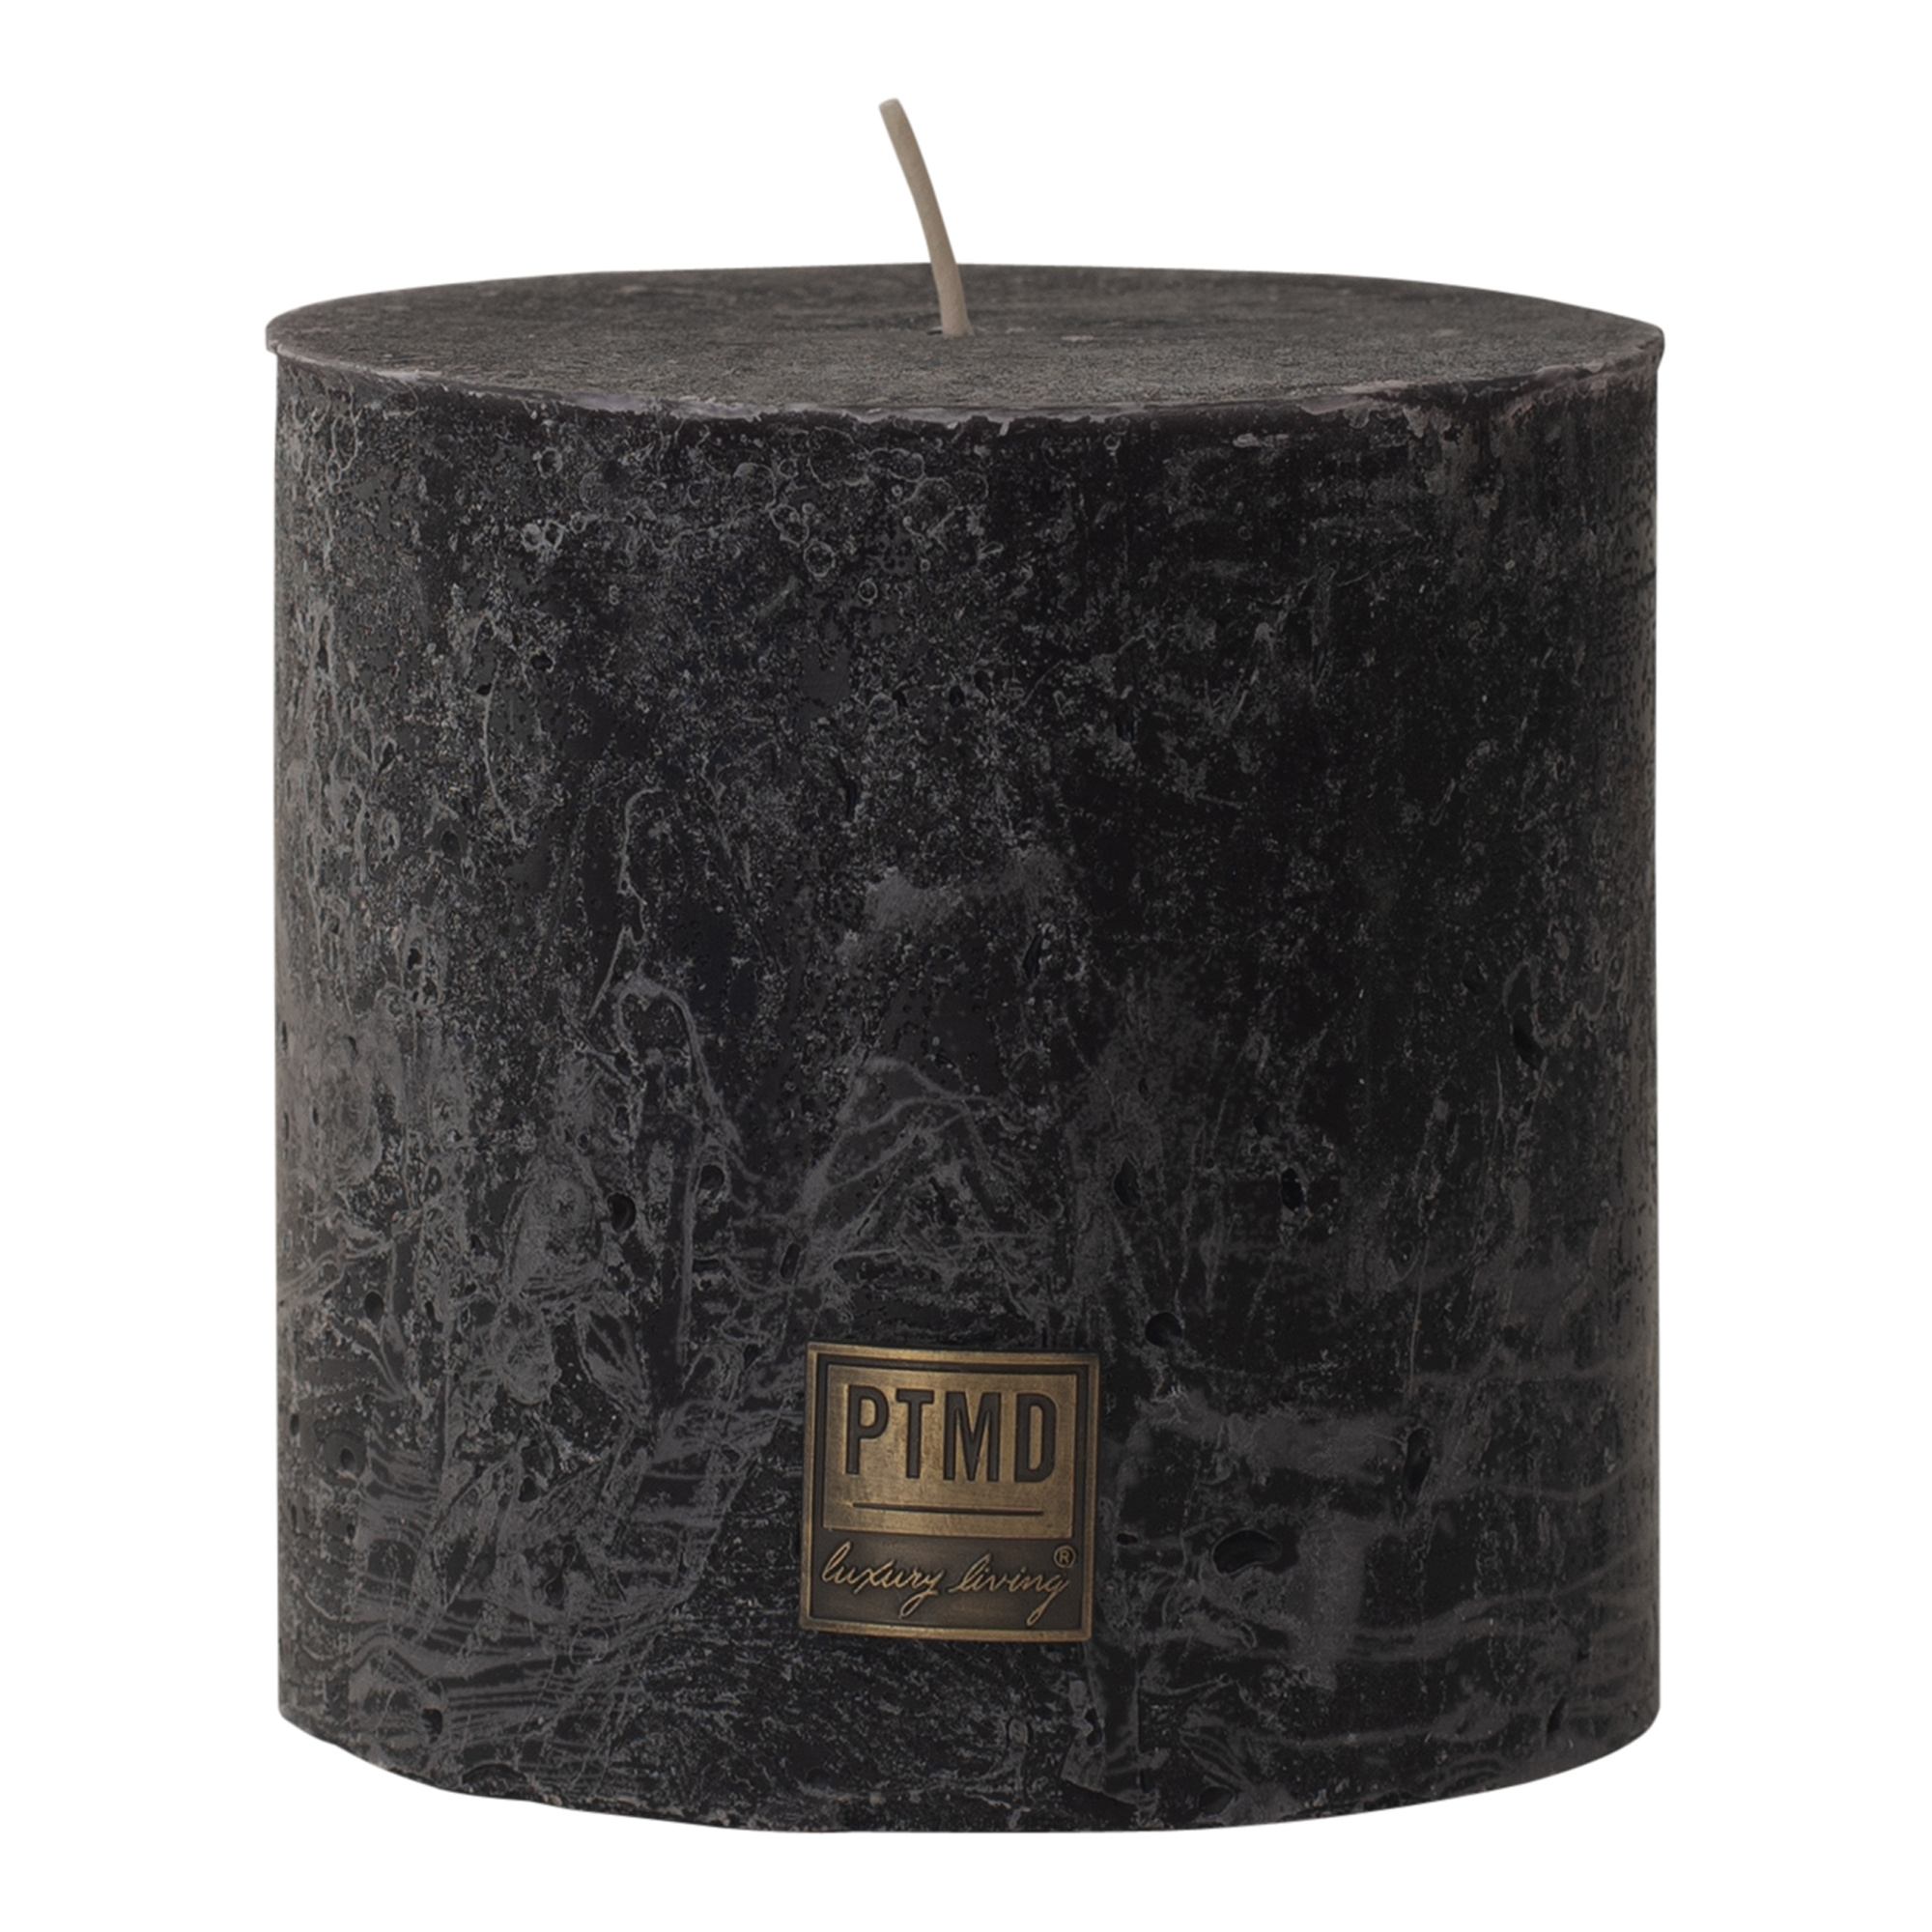 PTMD 10 x 10cm Rustic Charcoal Black Block Candle